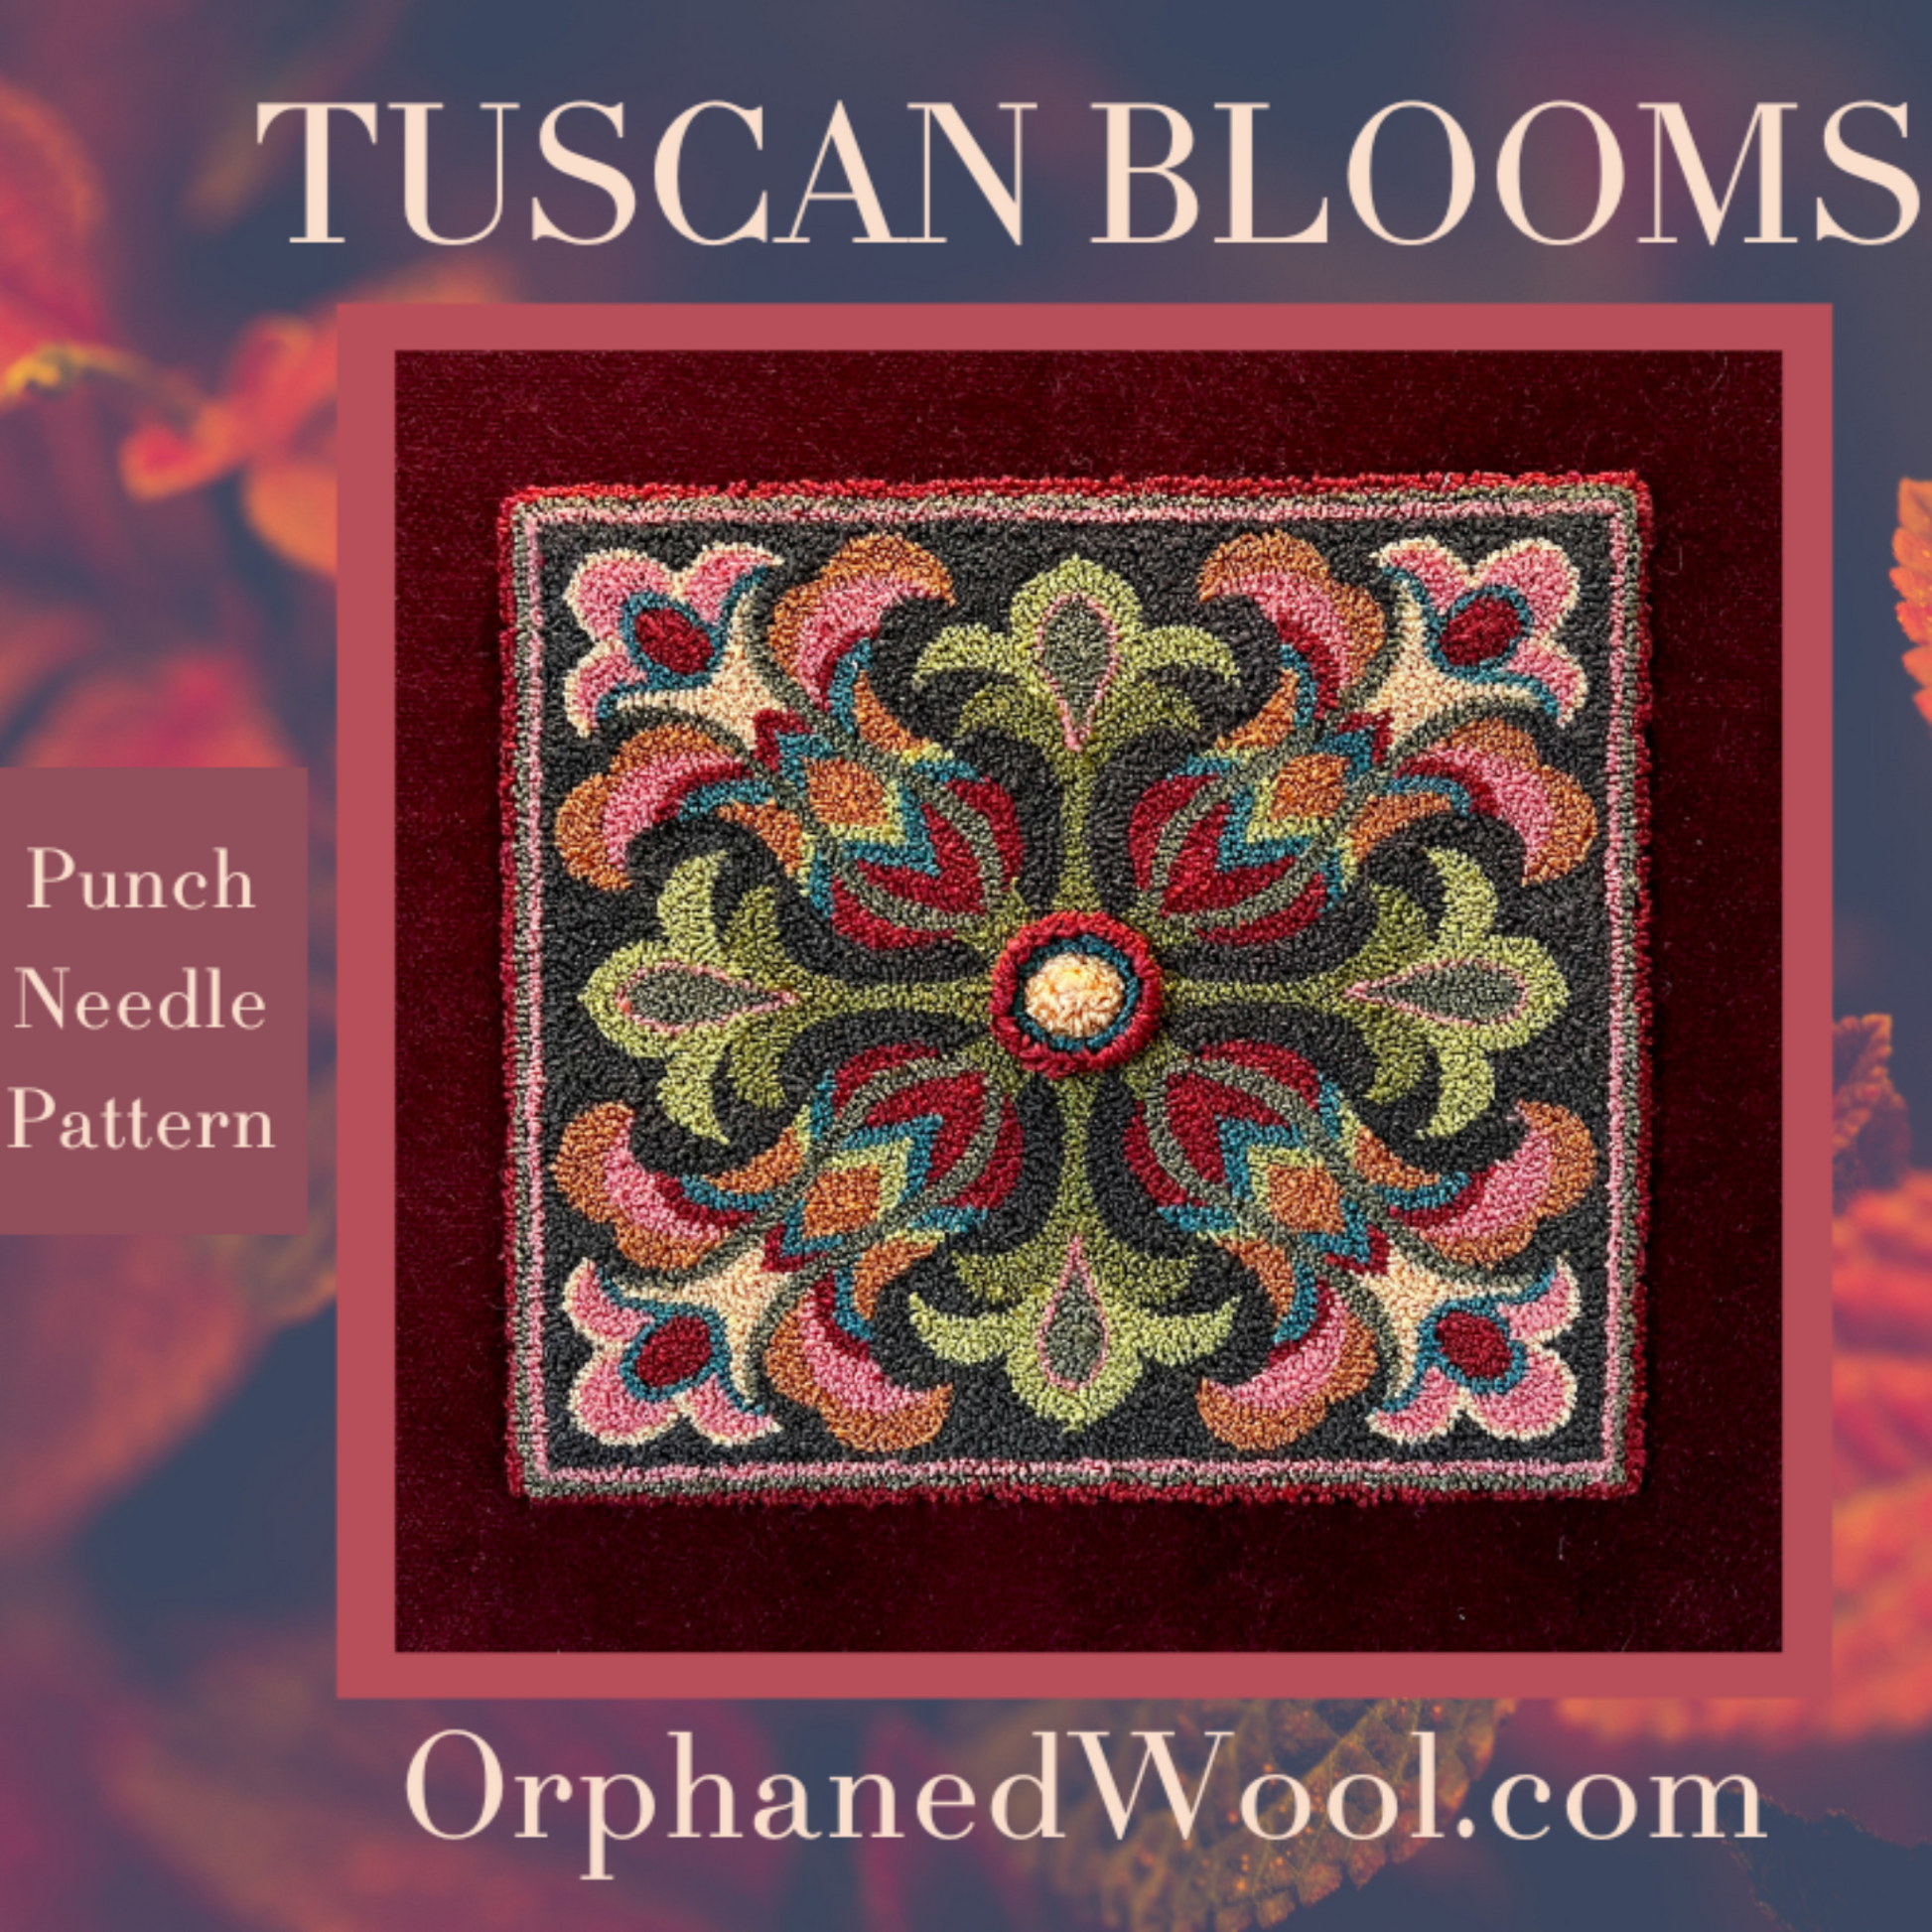 Tuscan Blooms Punch Needle Pattern by Orphaned Wool. This lovely pattern is available as a paper or Cloth Pattern with an option to purchase a custom thread kit, while supplies last. This beautiful flower pattern is Copyrighted 2023 Kelly Kanyok/ Orphaned Wool.